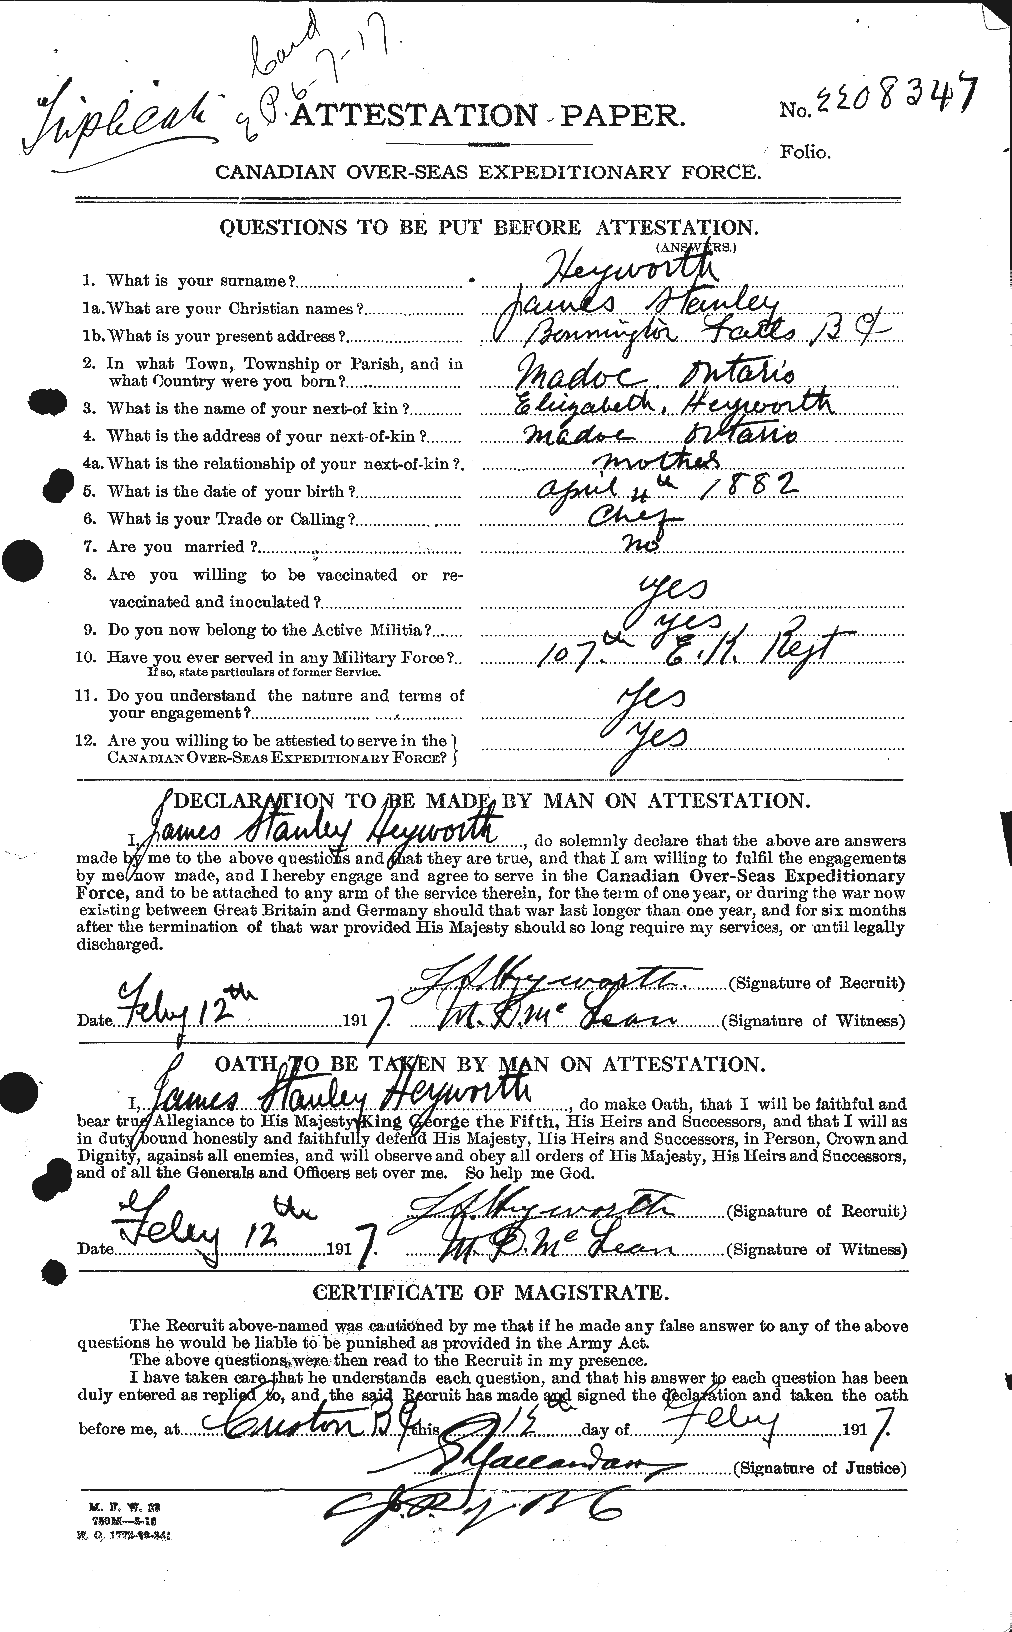 Personnel Records of the First World War - CEF 396138a